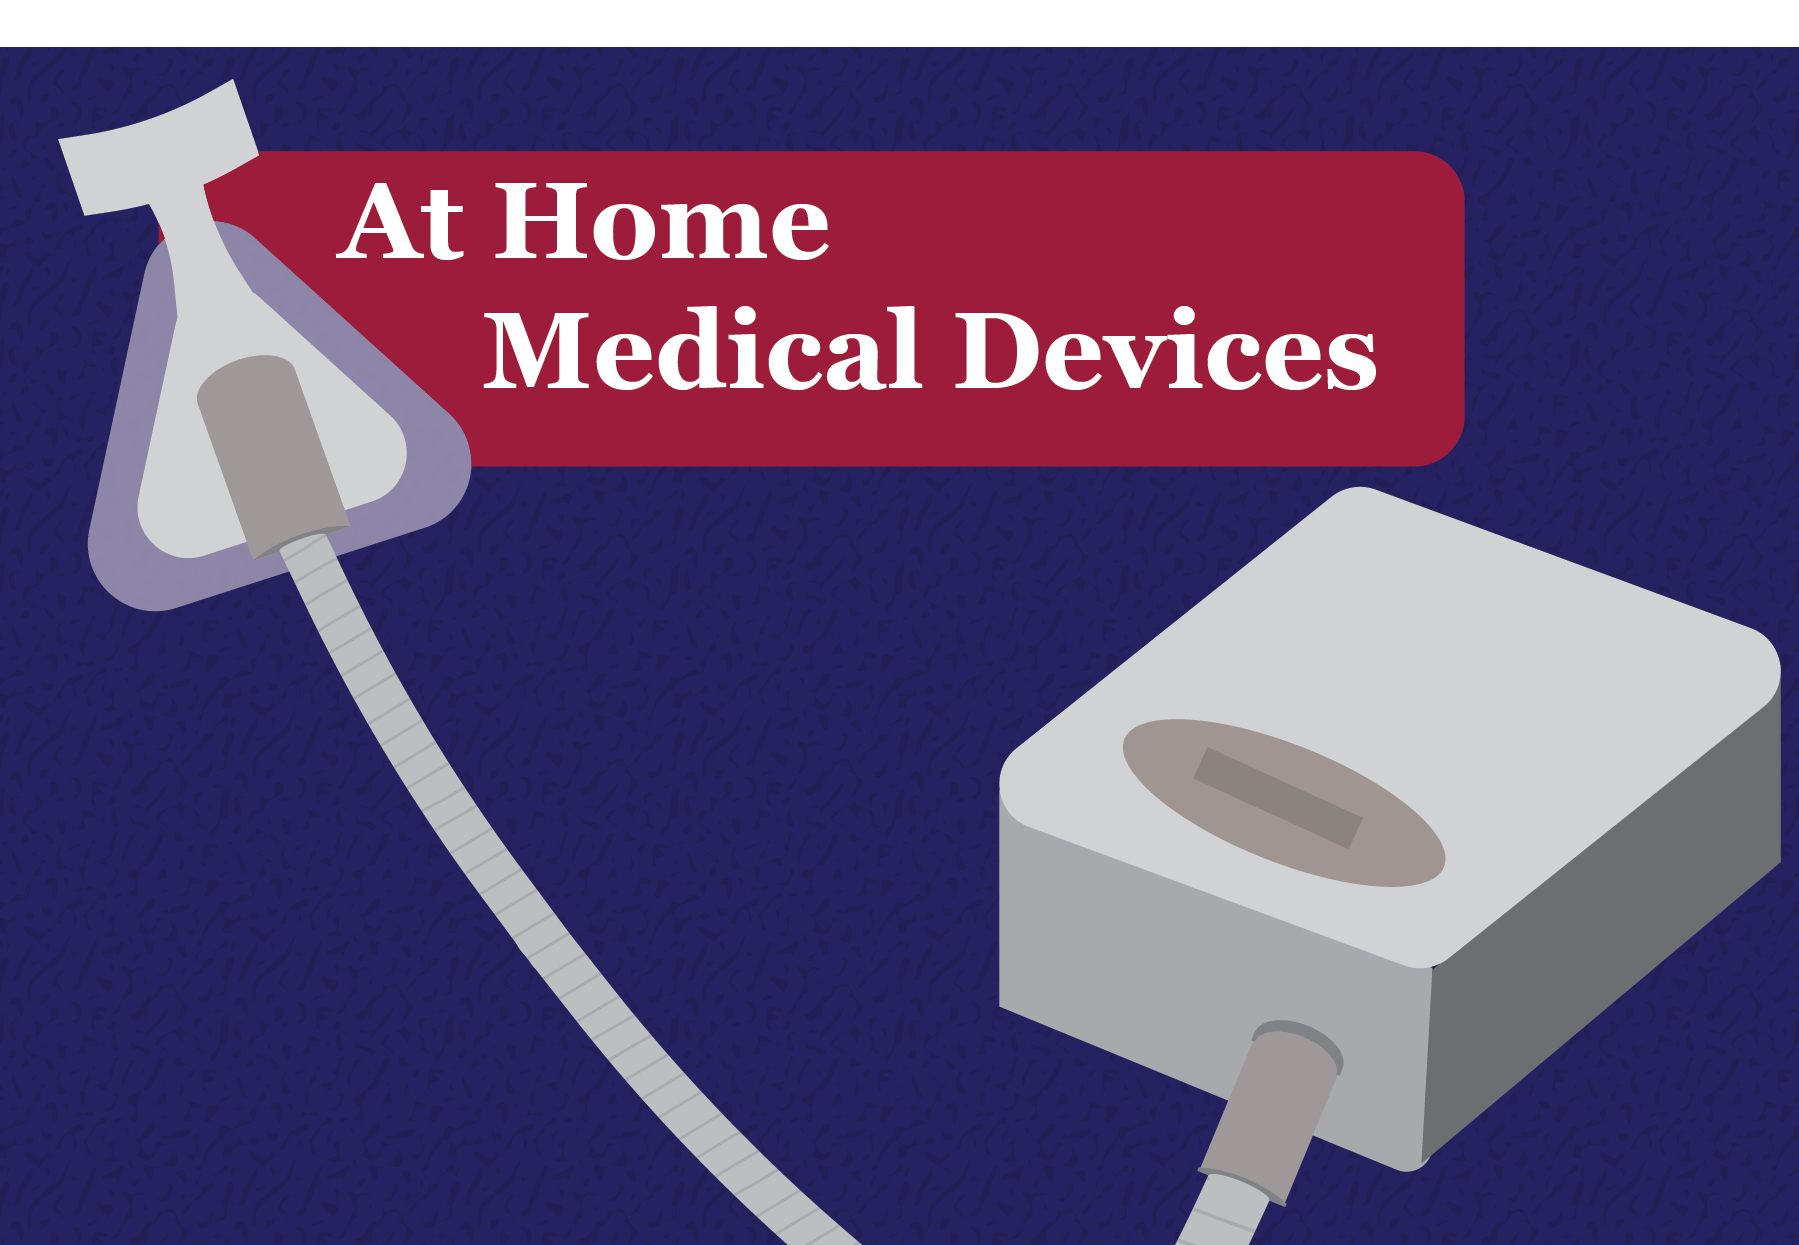 At Home Medical Devices